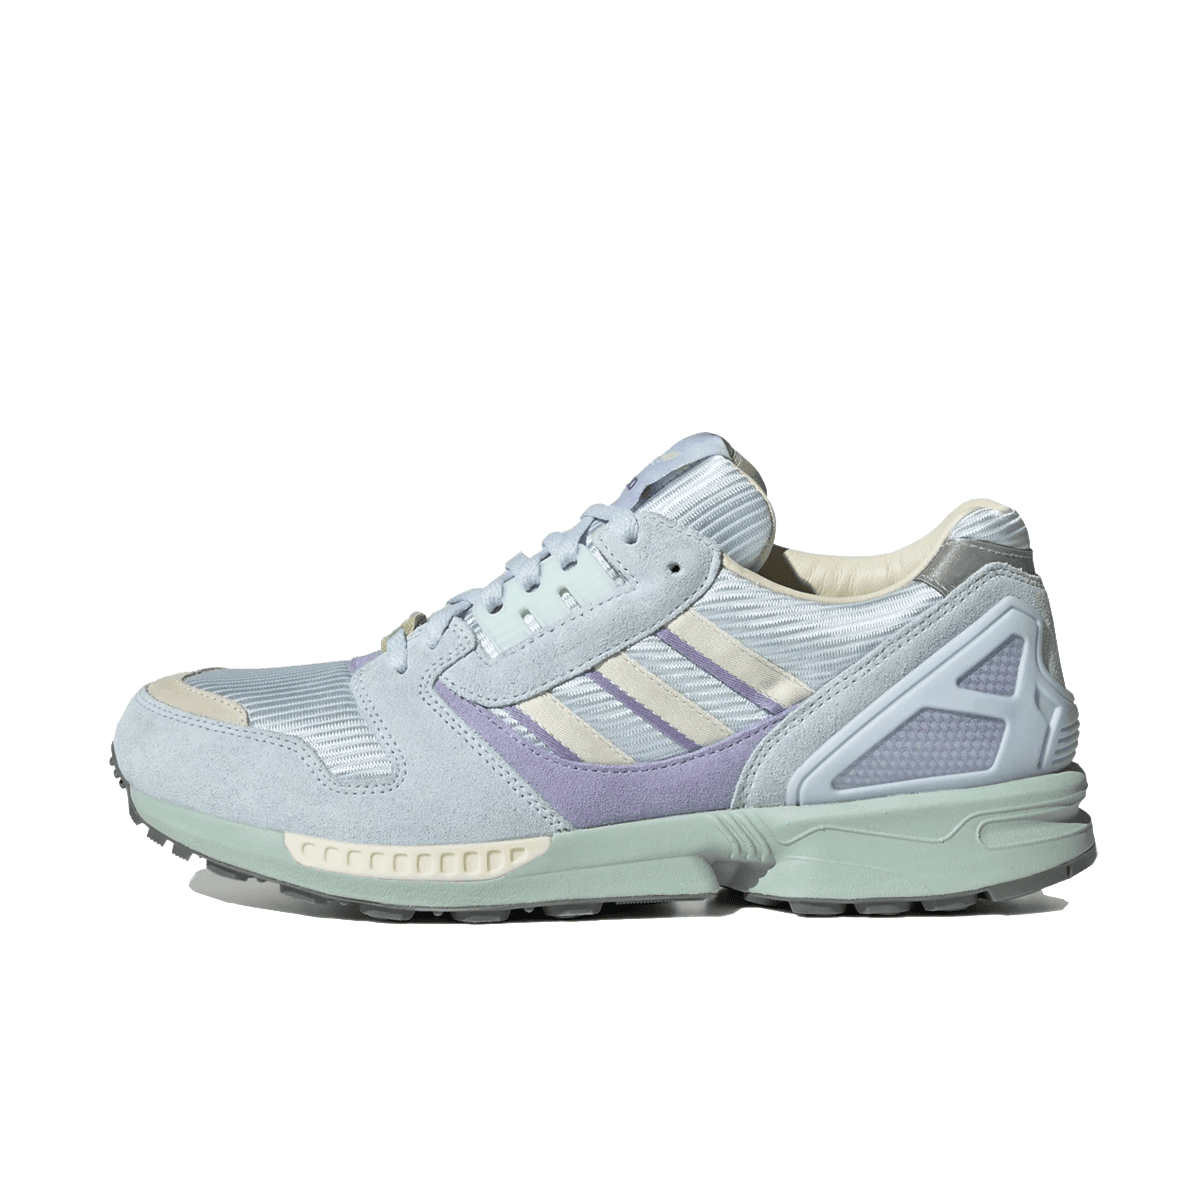 adidas ZX 700 HD | FY0971 | The Drop Date